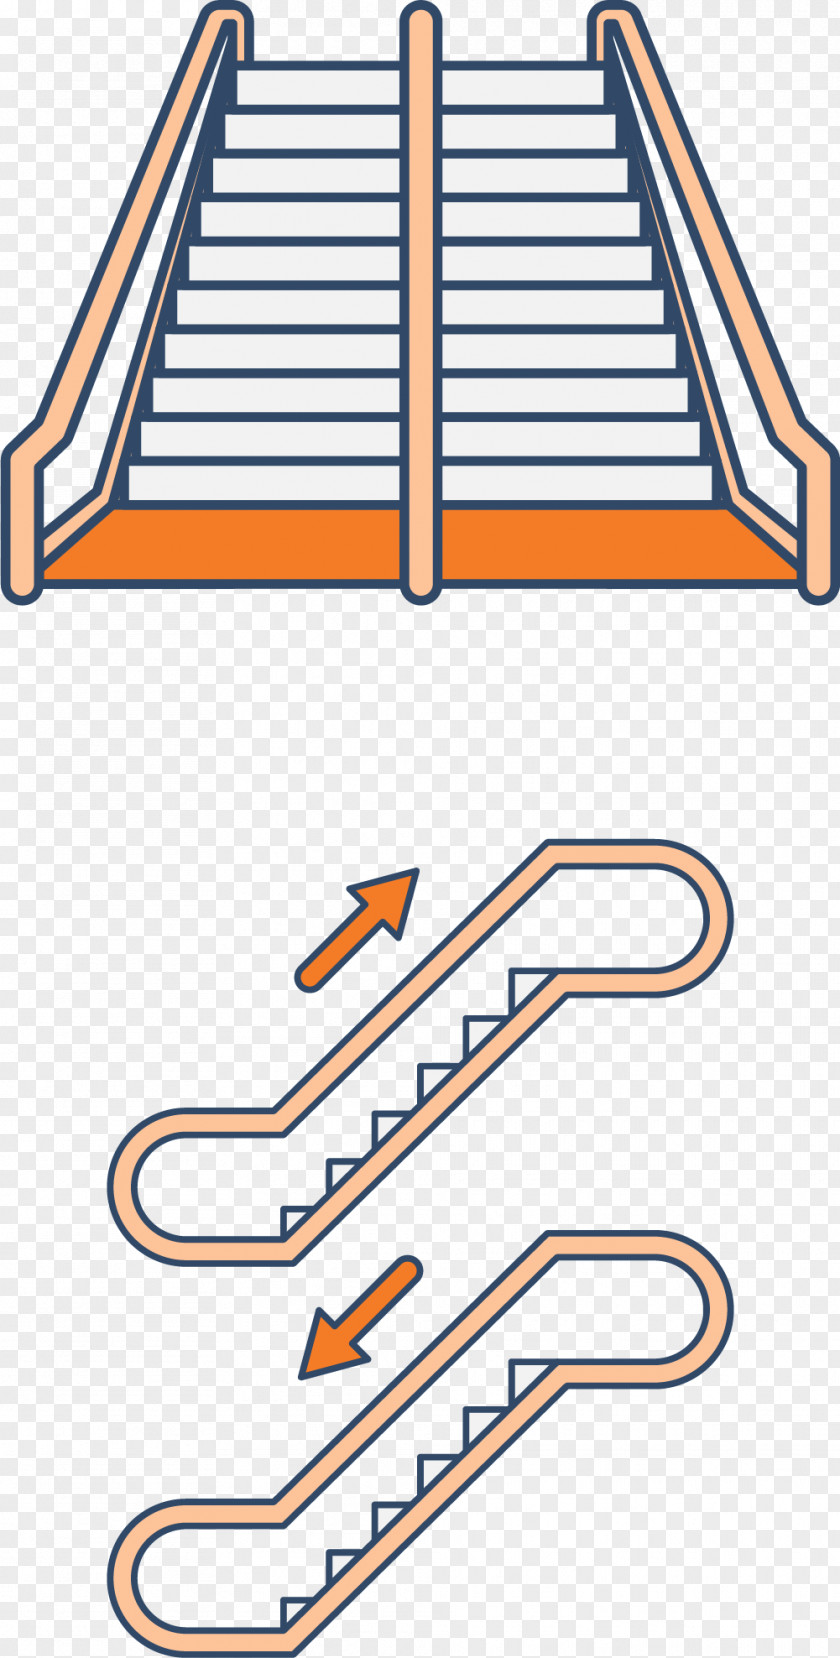 Parallel Ladder Stairs Escalator Elevator PNG